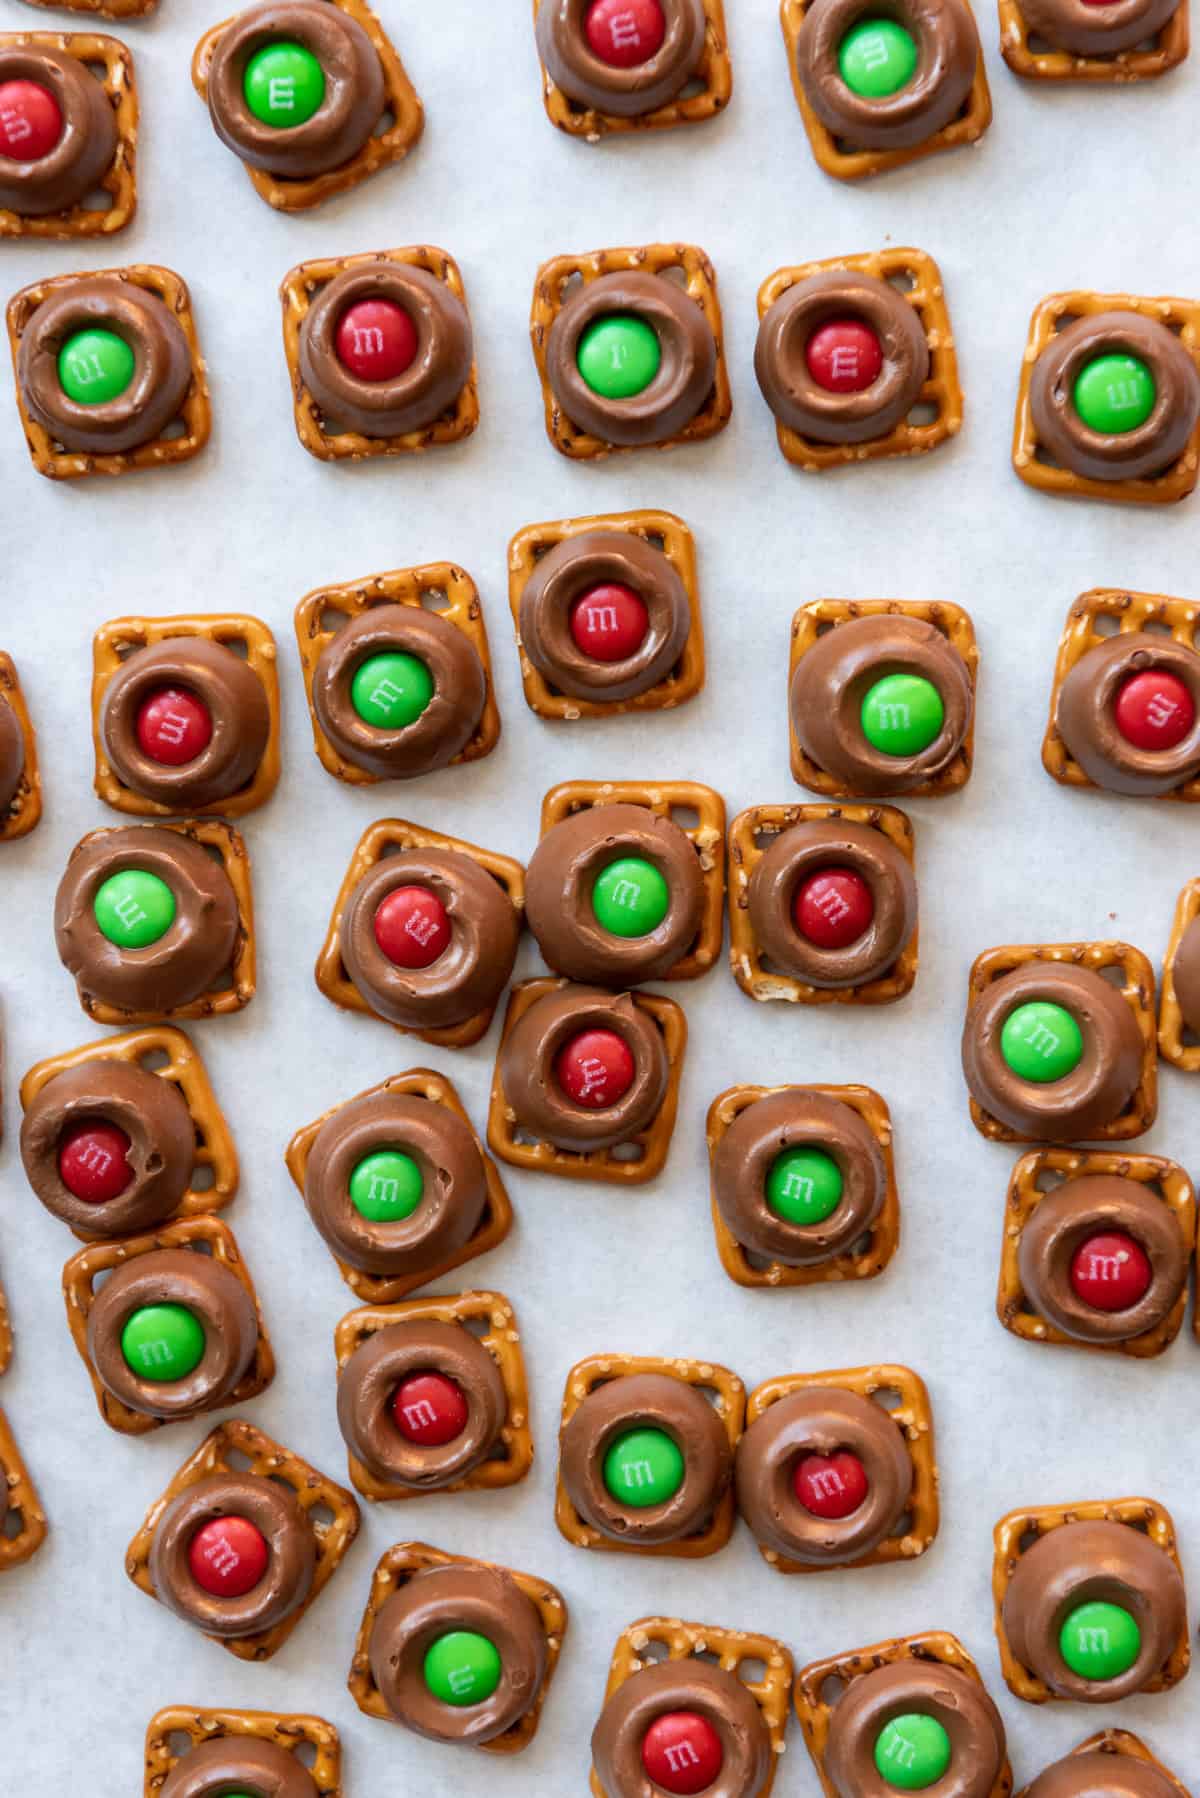 Christmas Rolo pretzels made with M&Ms scattered on a parchment paper surface.